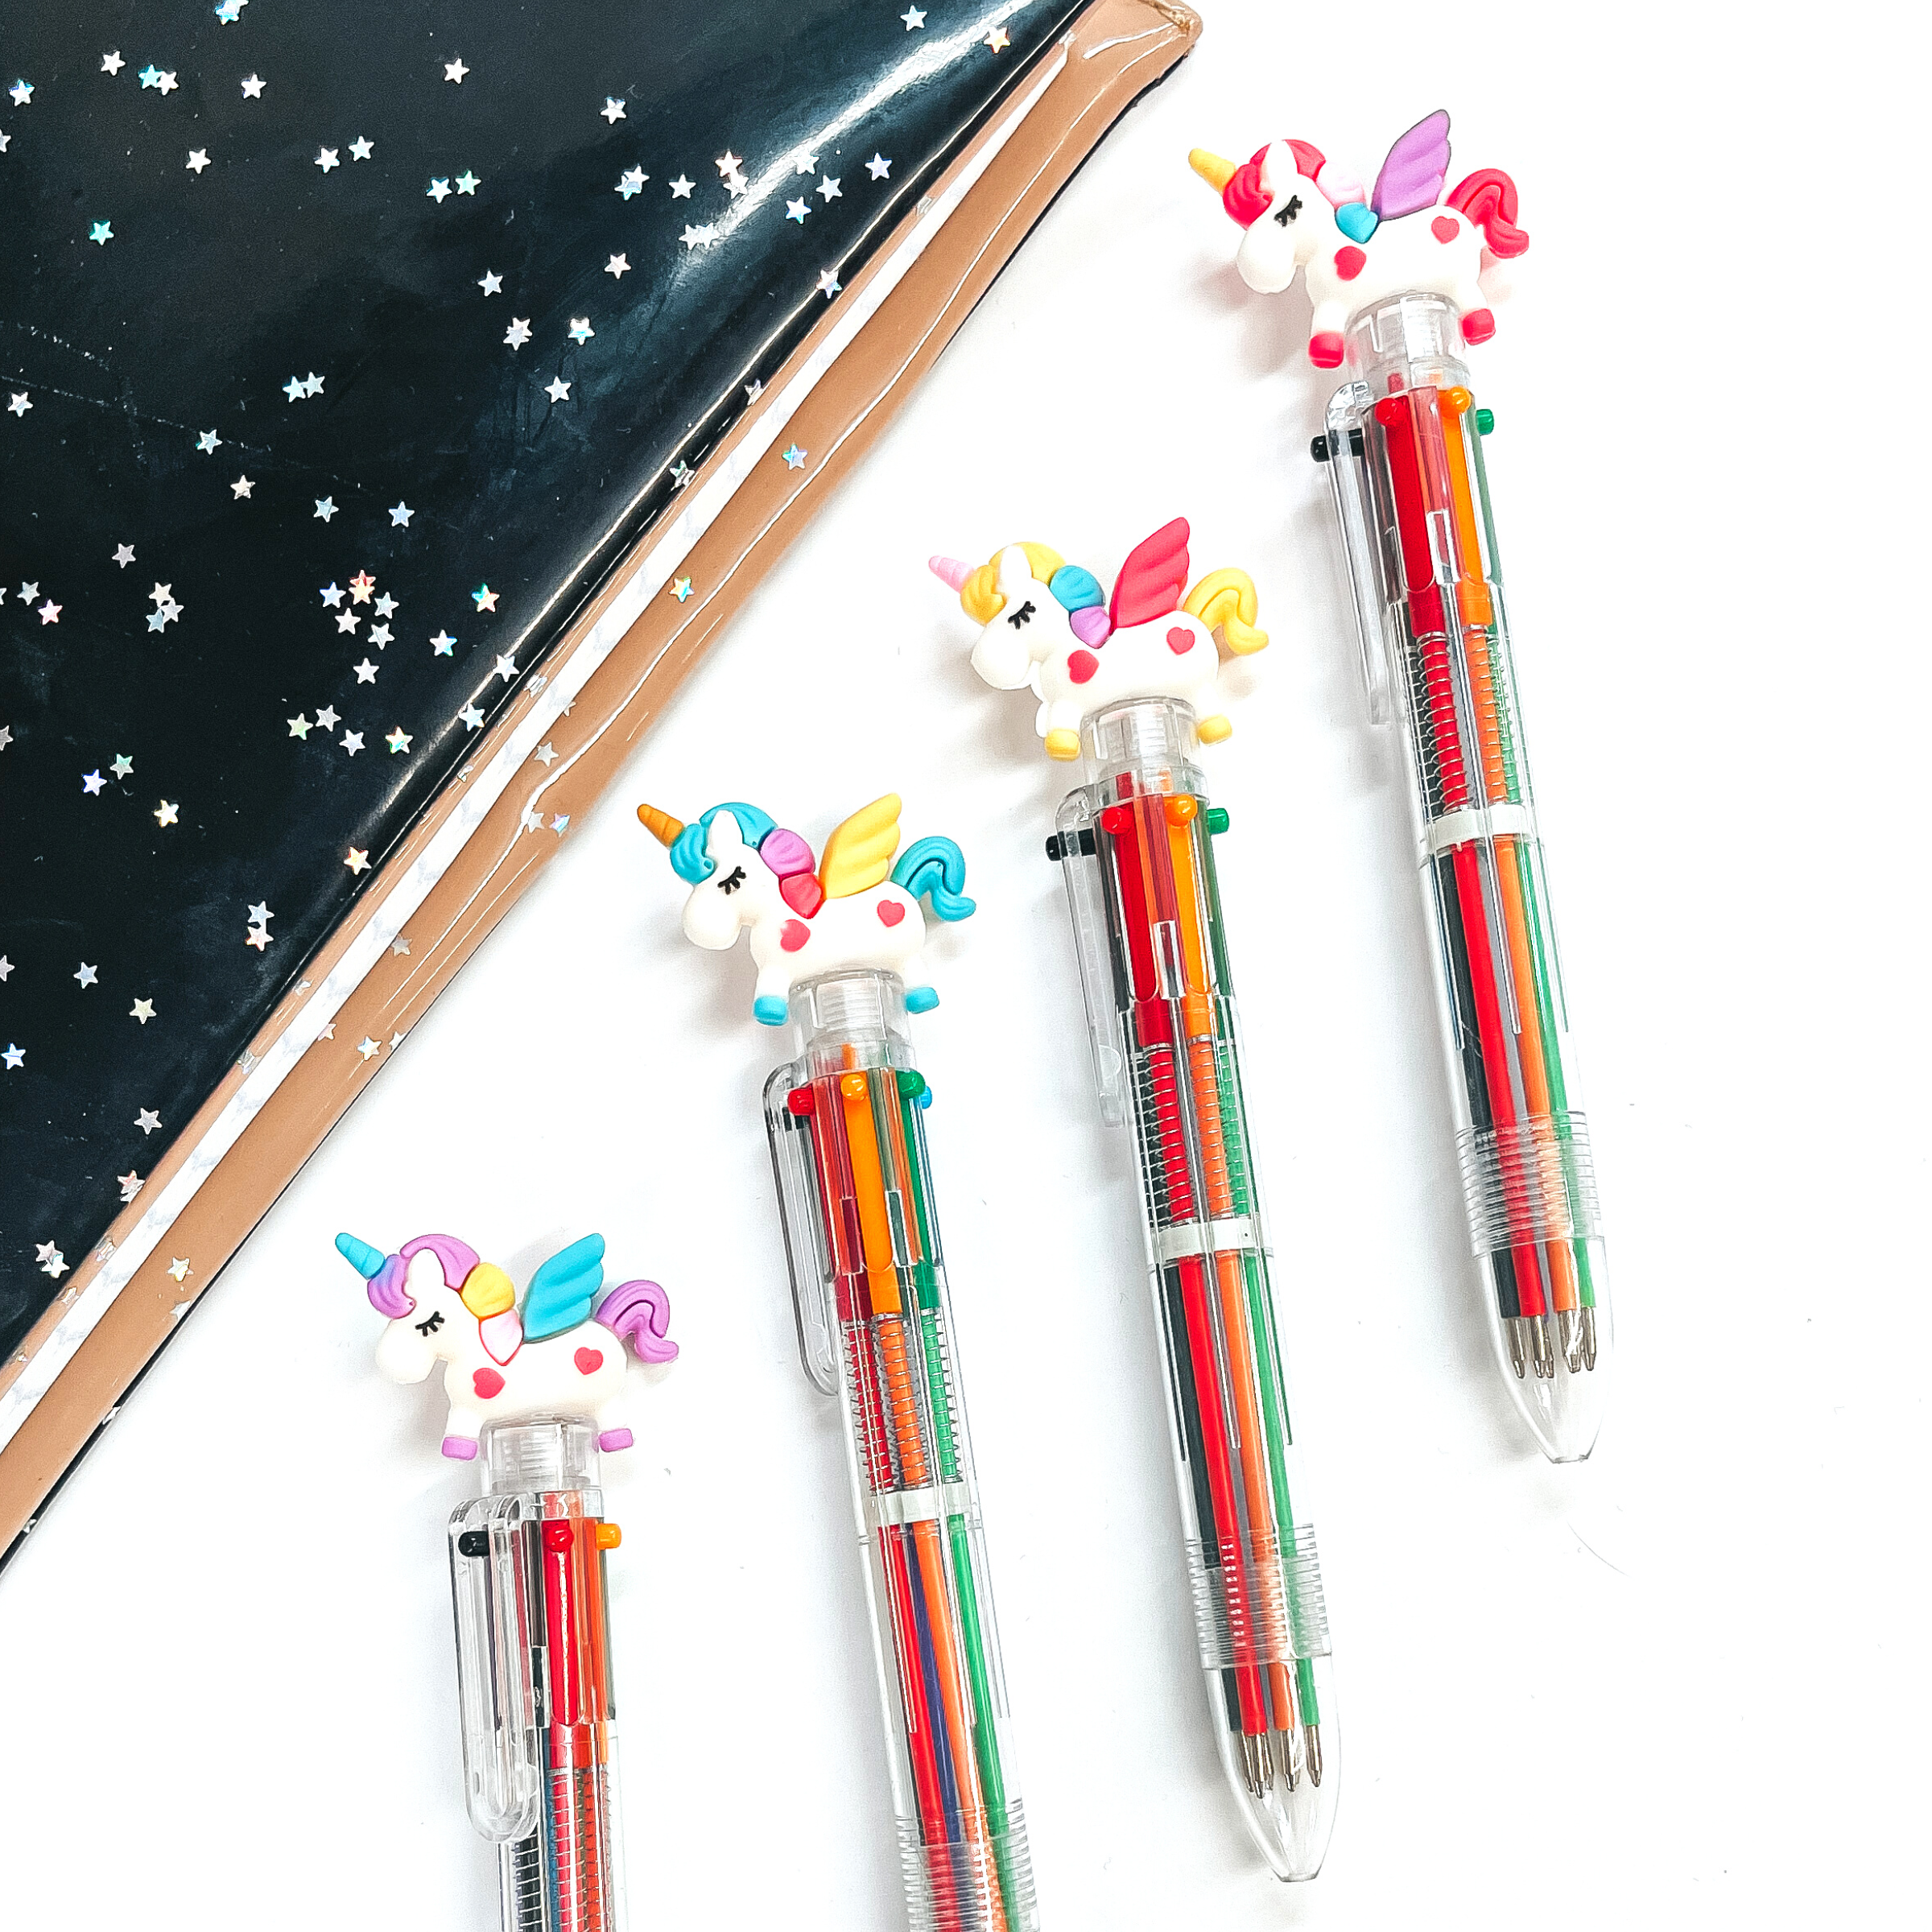 There are four shuttle pens with different colored unicorn toppers. All pens  have the same number and colored inks. From left to right; purle hair unicorn,  turquoise hair unicorn, yellow hair unircorn, and pink hair unicorn. All of these  pens are laying on a white background with a black shiny notebook and shiny stars.